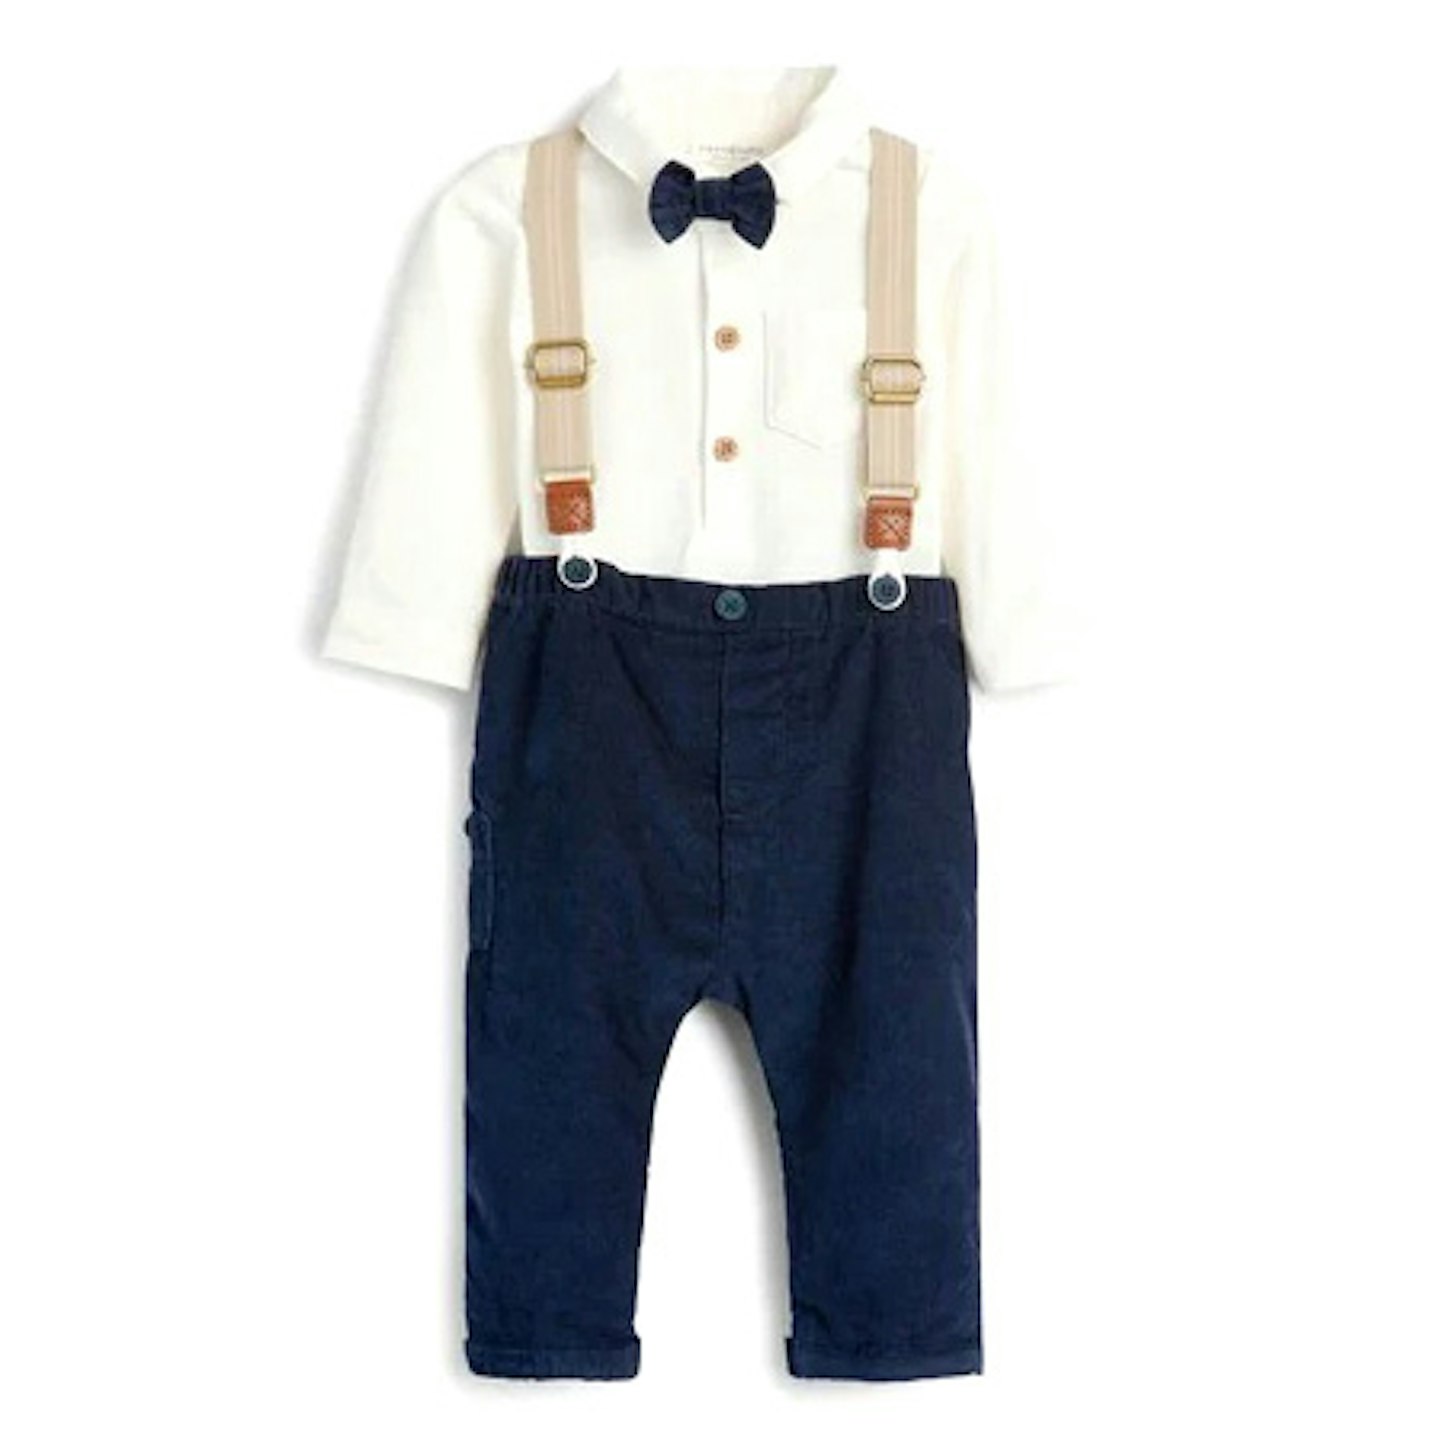 Smart Baby 4 Piece Shirt Body, Bow Tie, Trousers And Braces Set